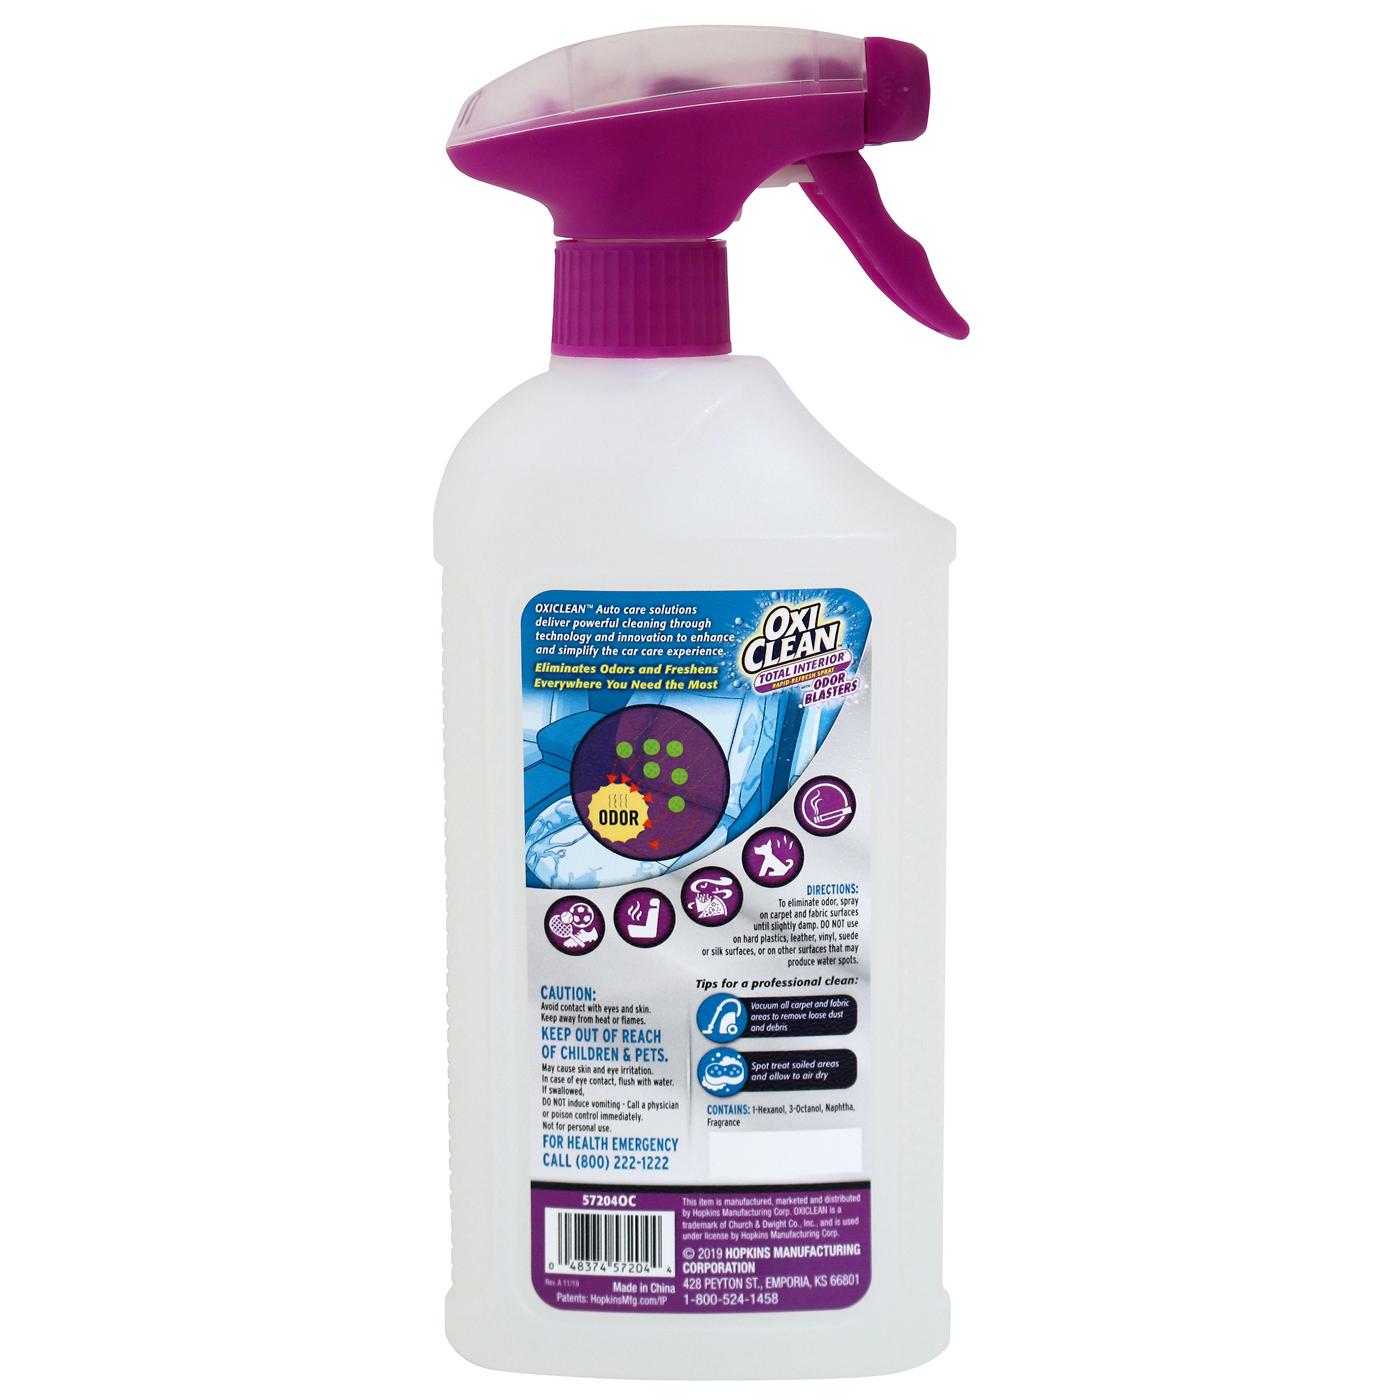 OxiClean Total Interior Rapid-Refresh Spray with Odor Blasters; image 2 of 2